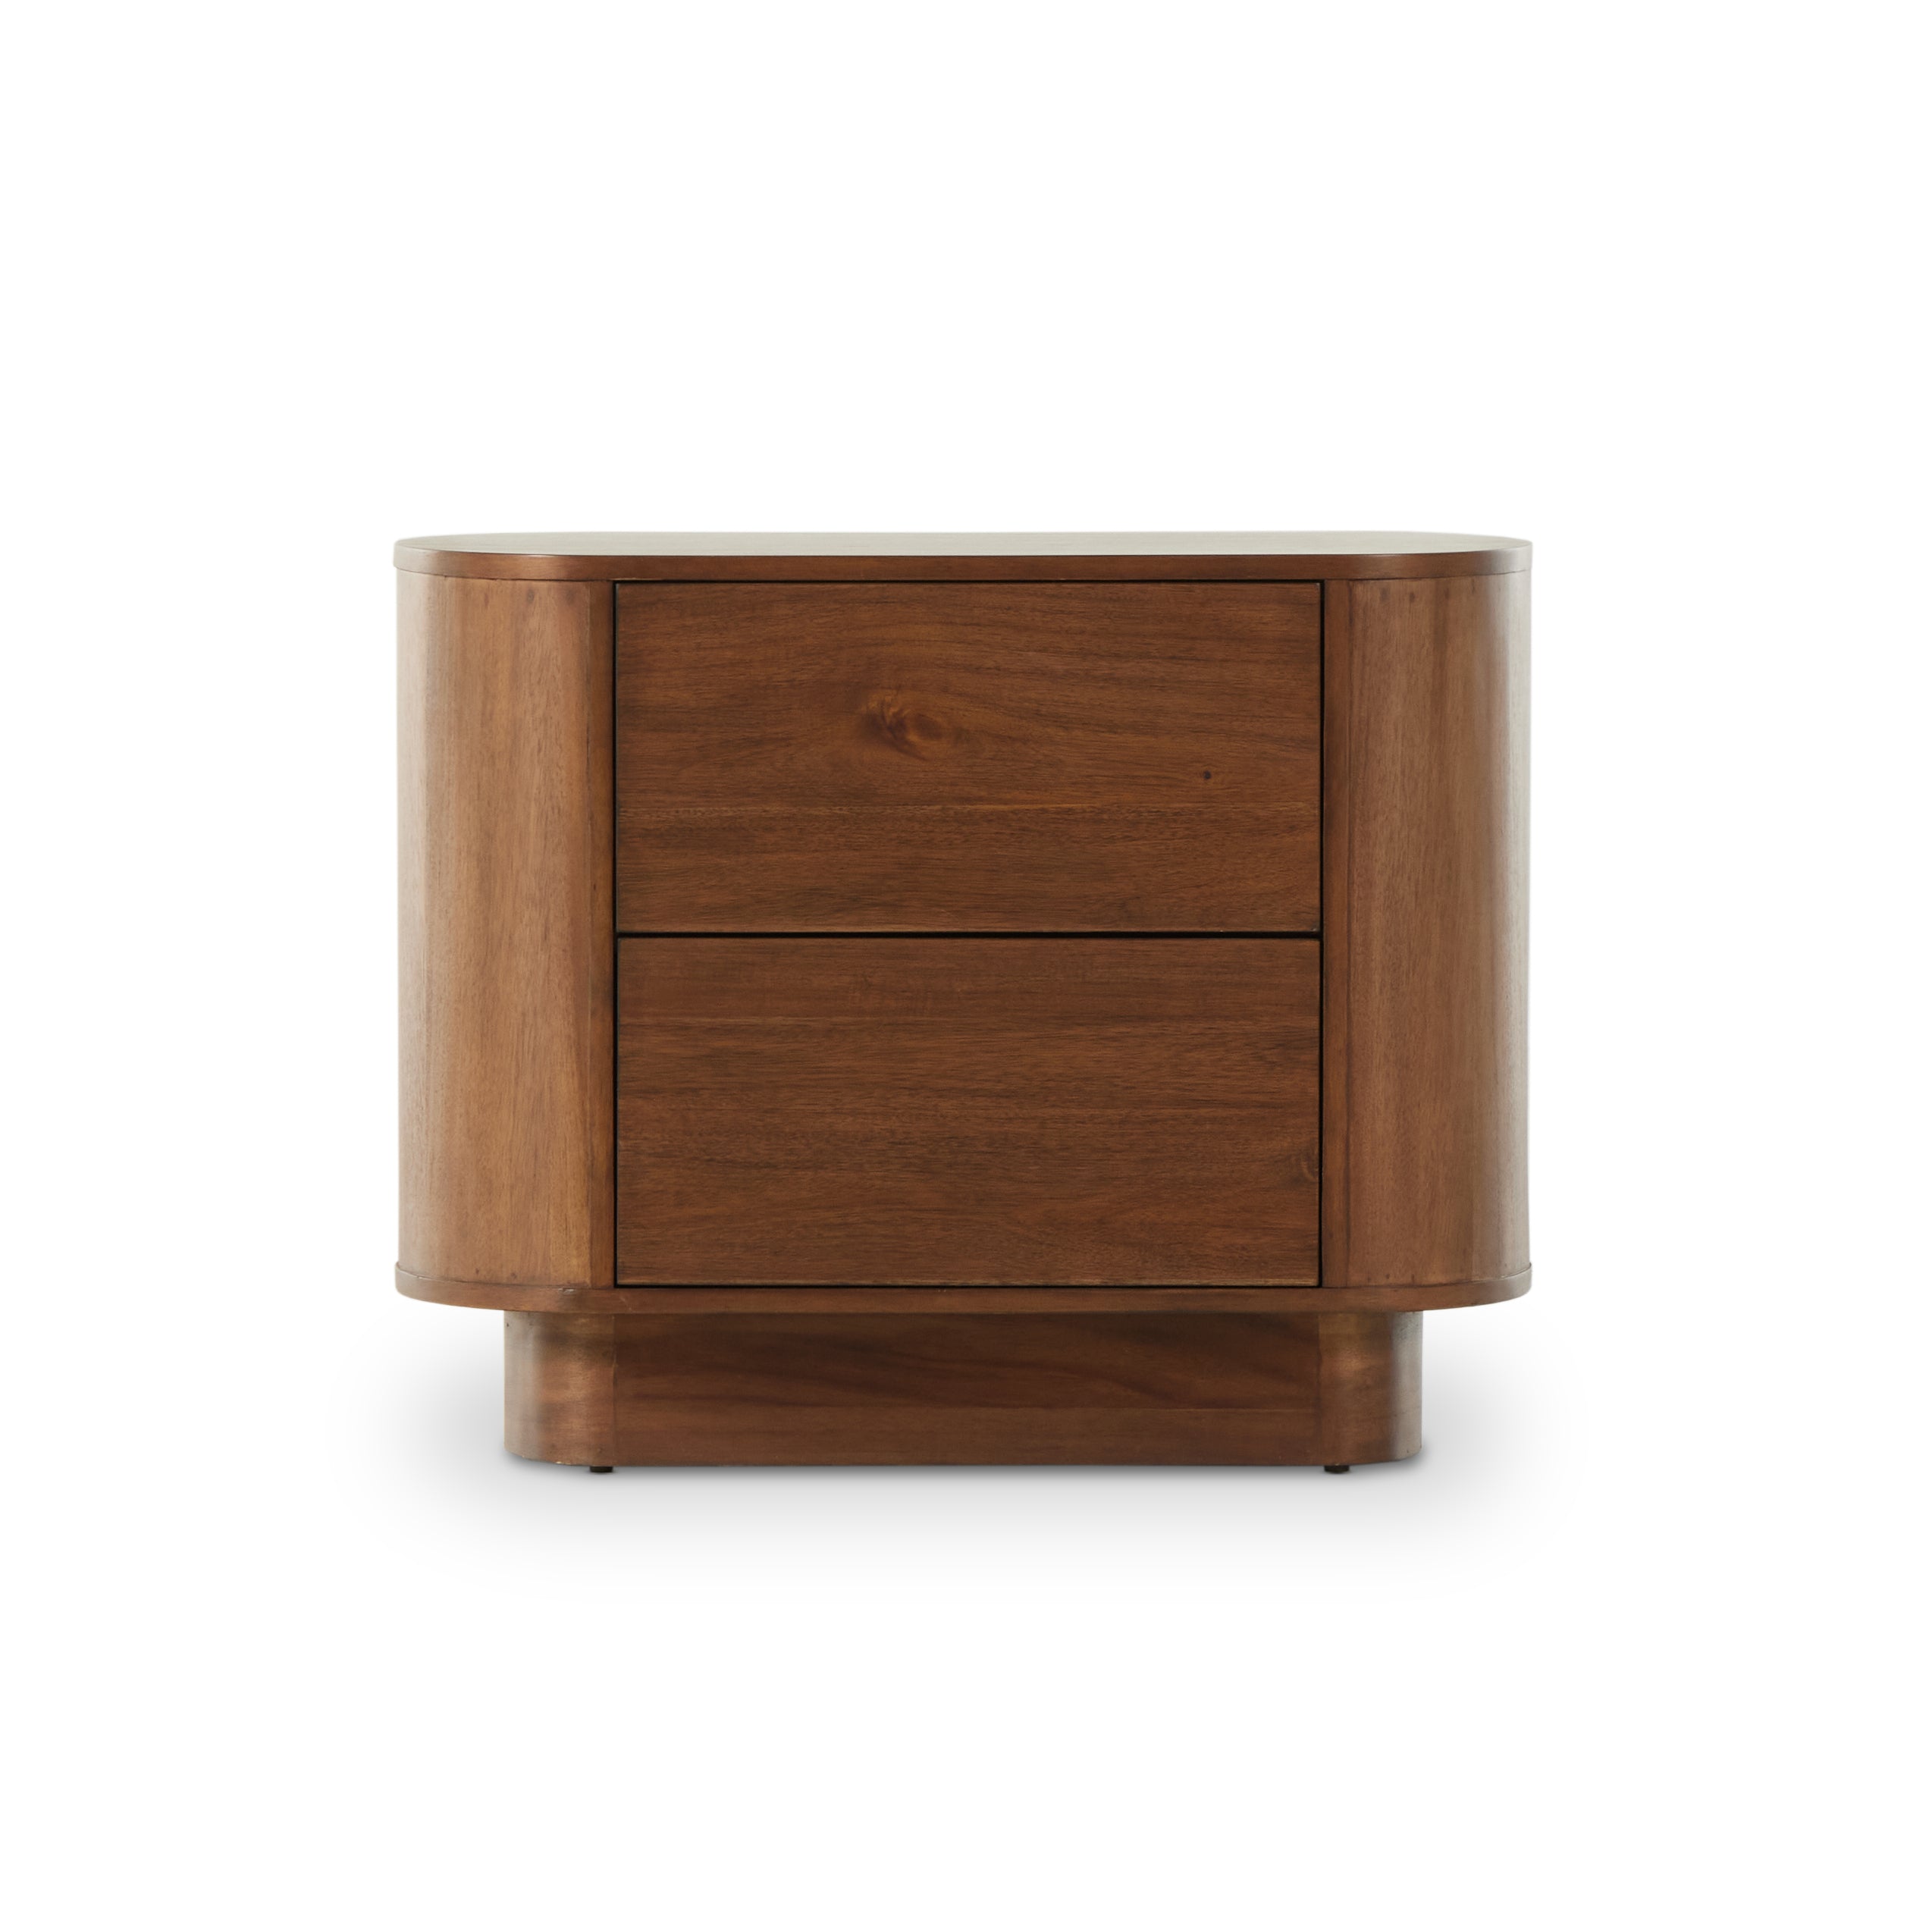 Seasoned brown acacia forms a curved pedestal base, bringing gentle curves to a classic nightstand shape. Amethyst Home provides interior design, new construction, custom furniture, and area rugs in the Los Angeles metro area.